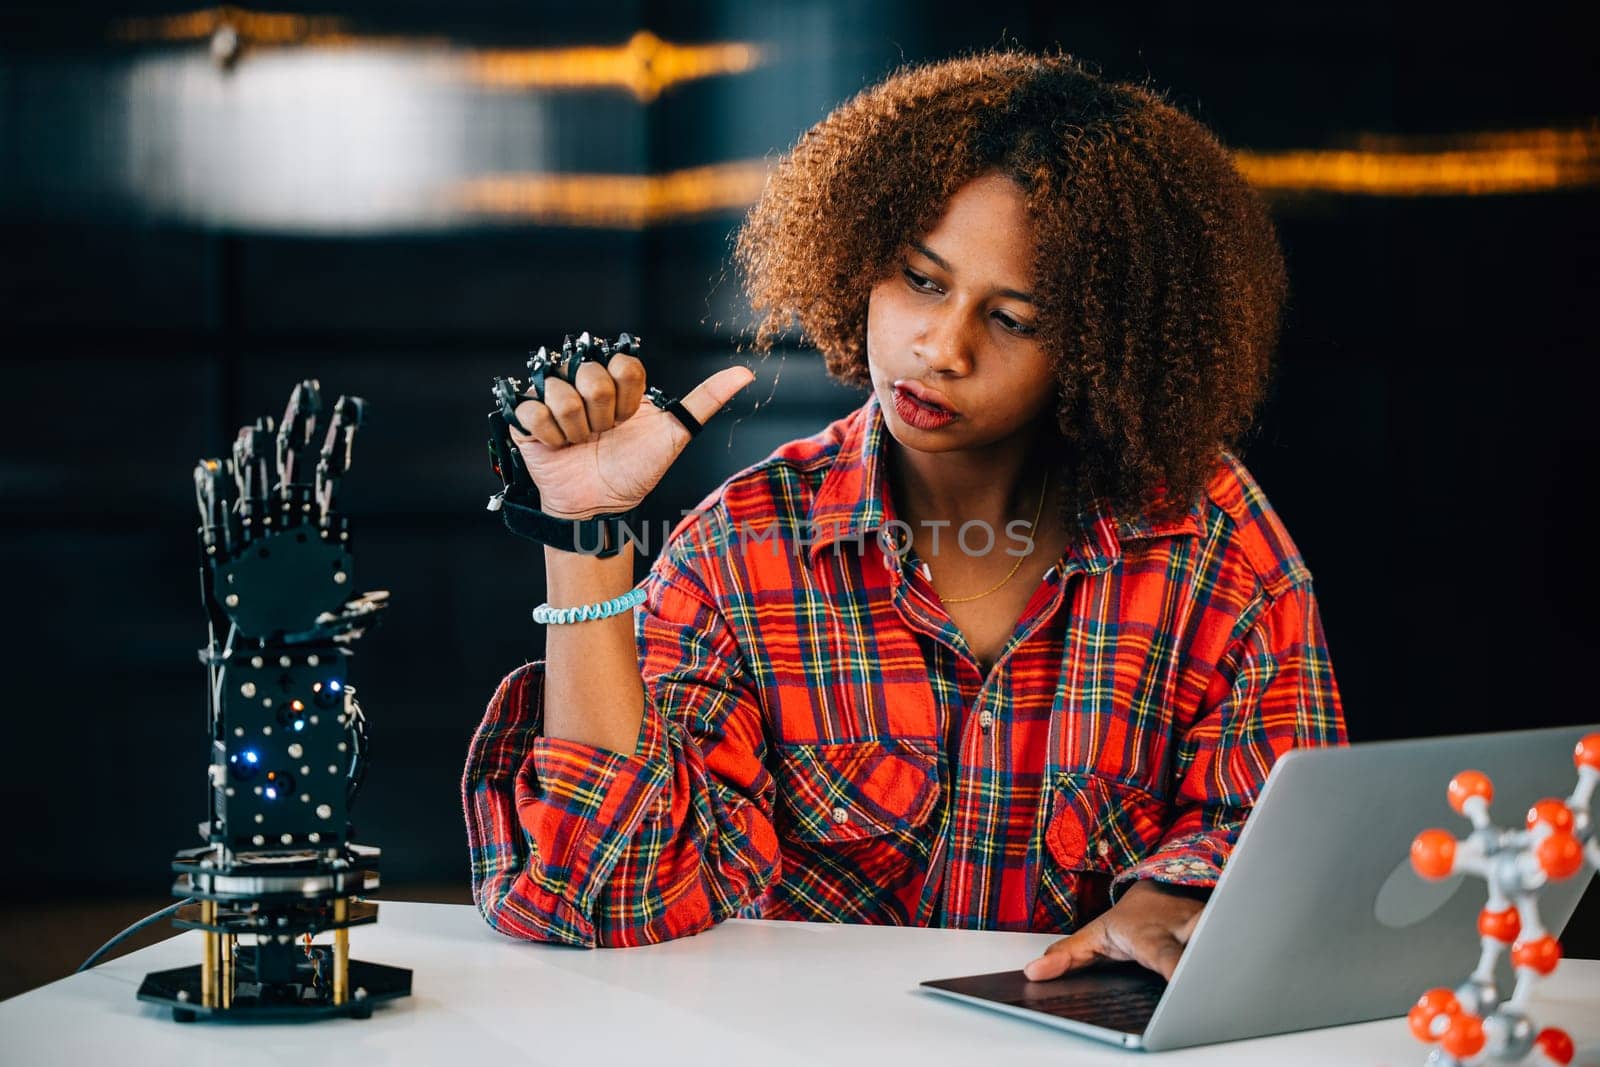 Portrait of a Black teenager studying a robotic arm in a classroom for an engineering project. Skillfully controlling the arm she embraces innovation intelligence and technology.